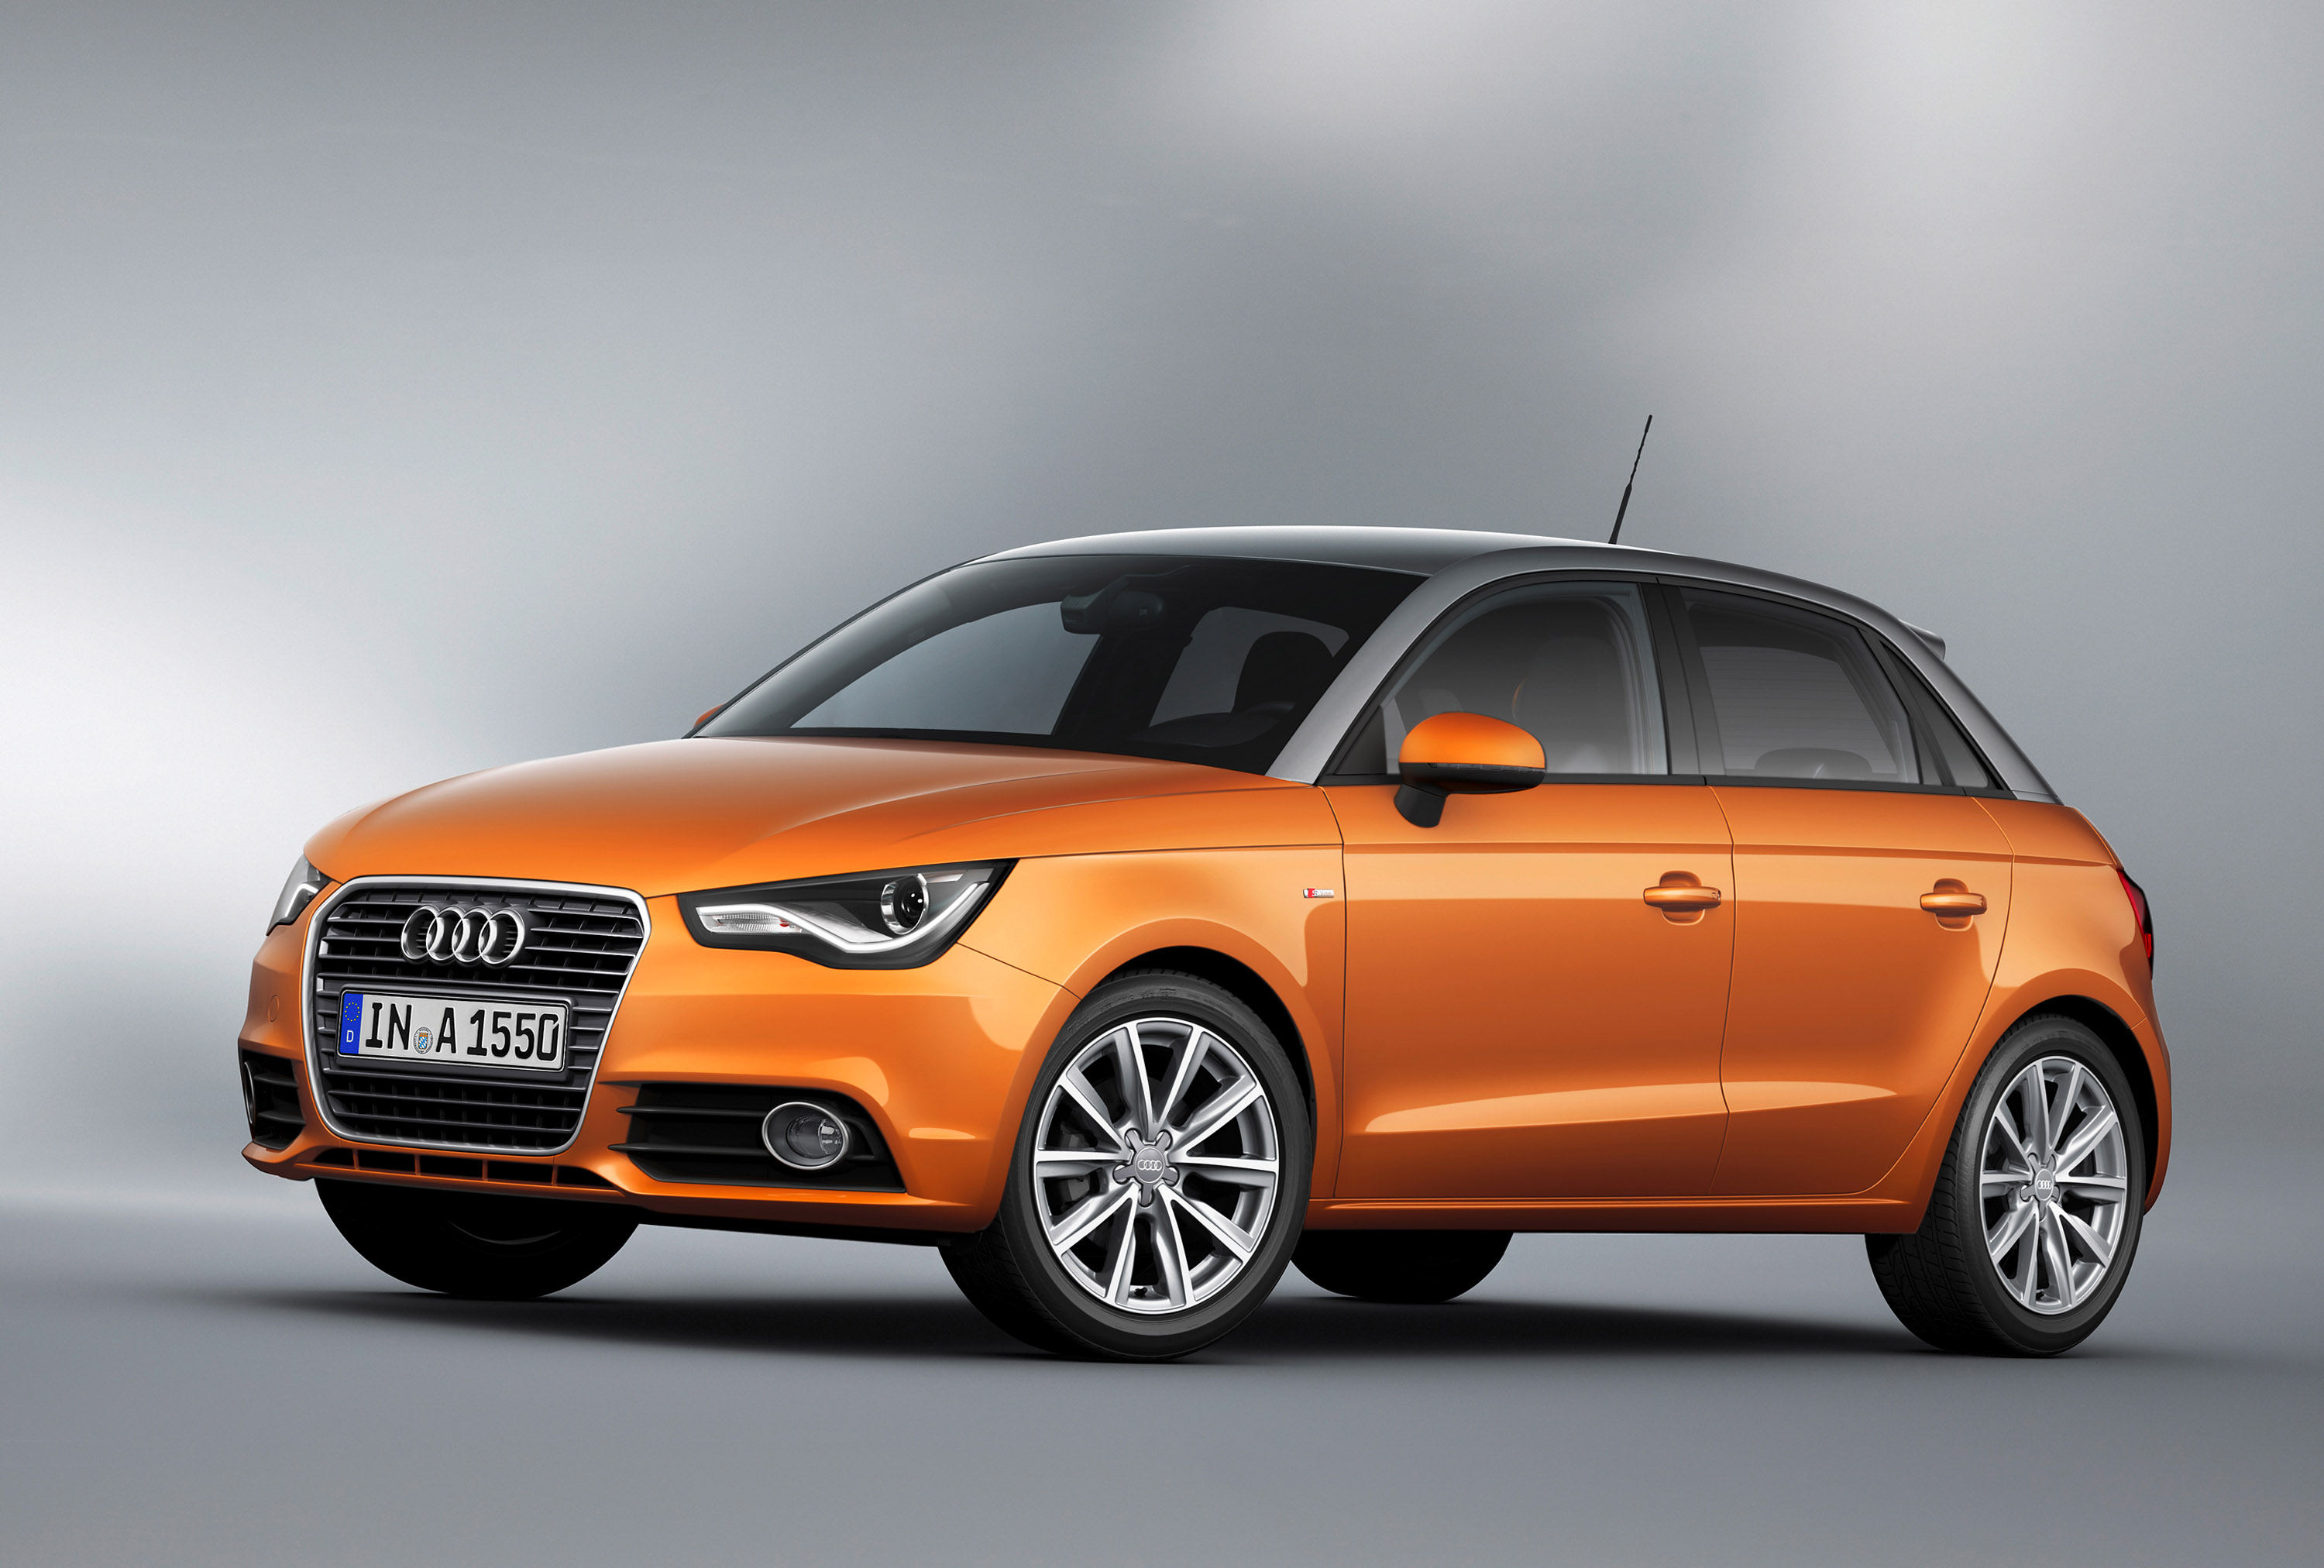 2013 Audi A1 Sportback To Launch In Australia By Late Q2